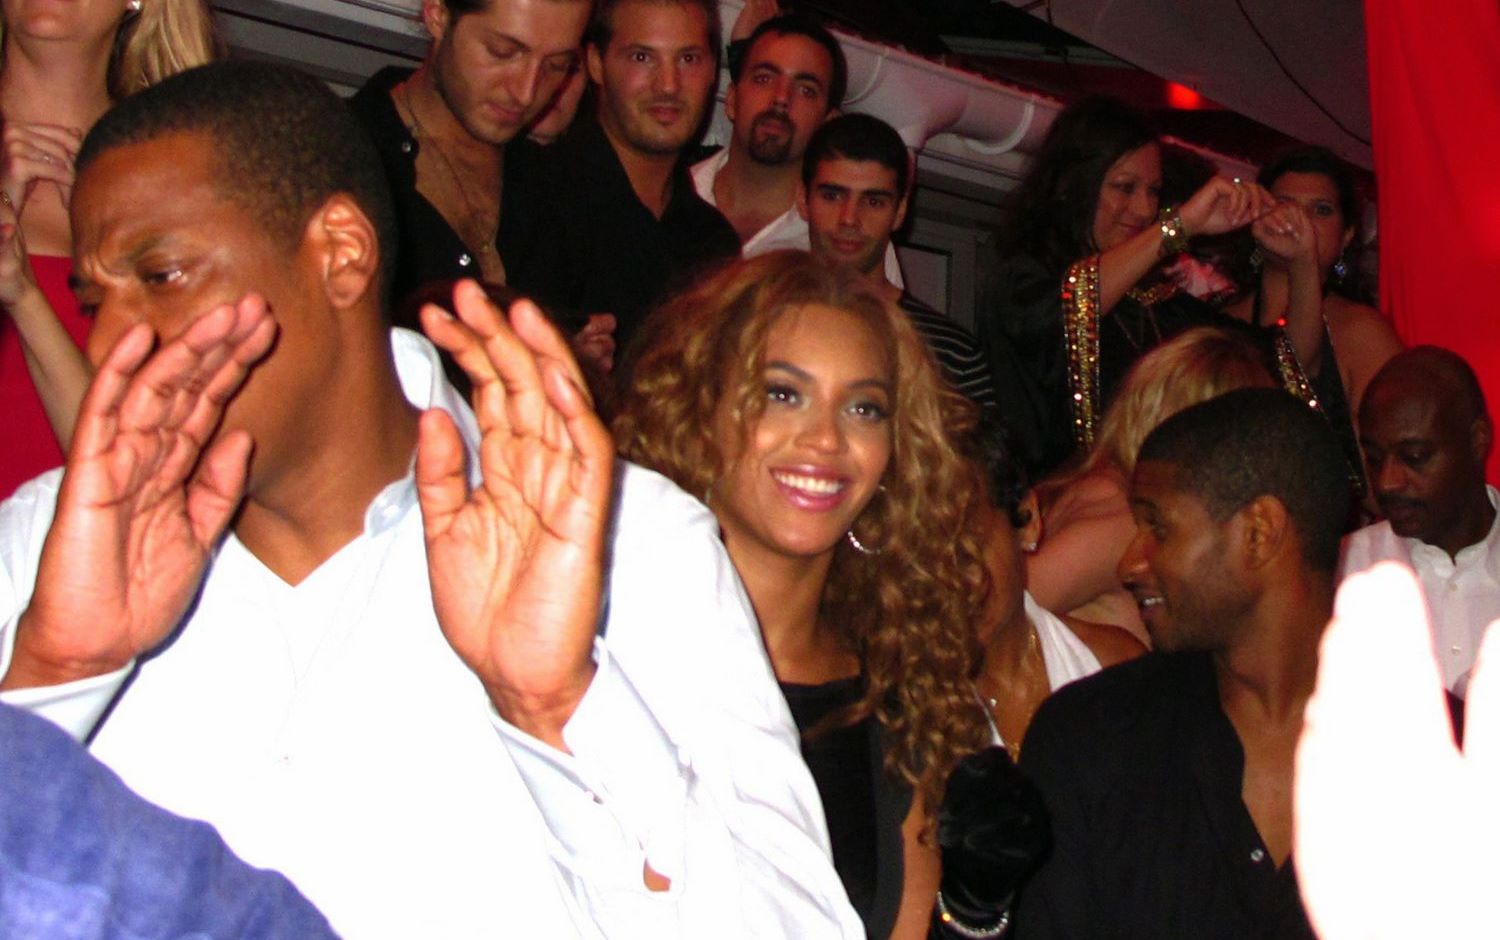 Pics: Beyonce, Jay-Z & Usher Celebrate The New Year Together | HipHop-N-More1500 x 940